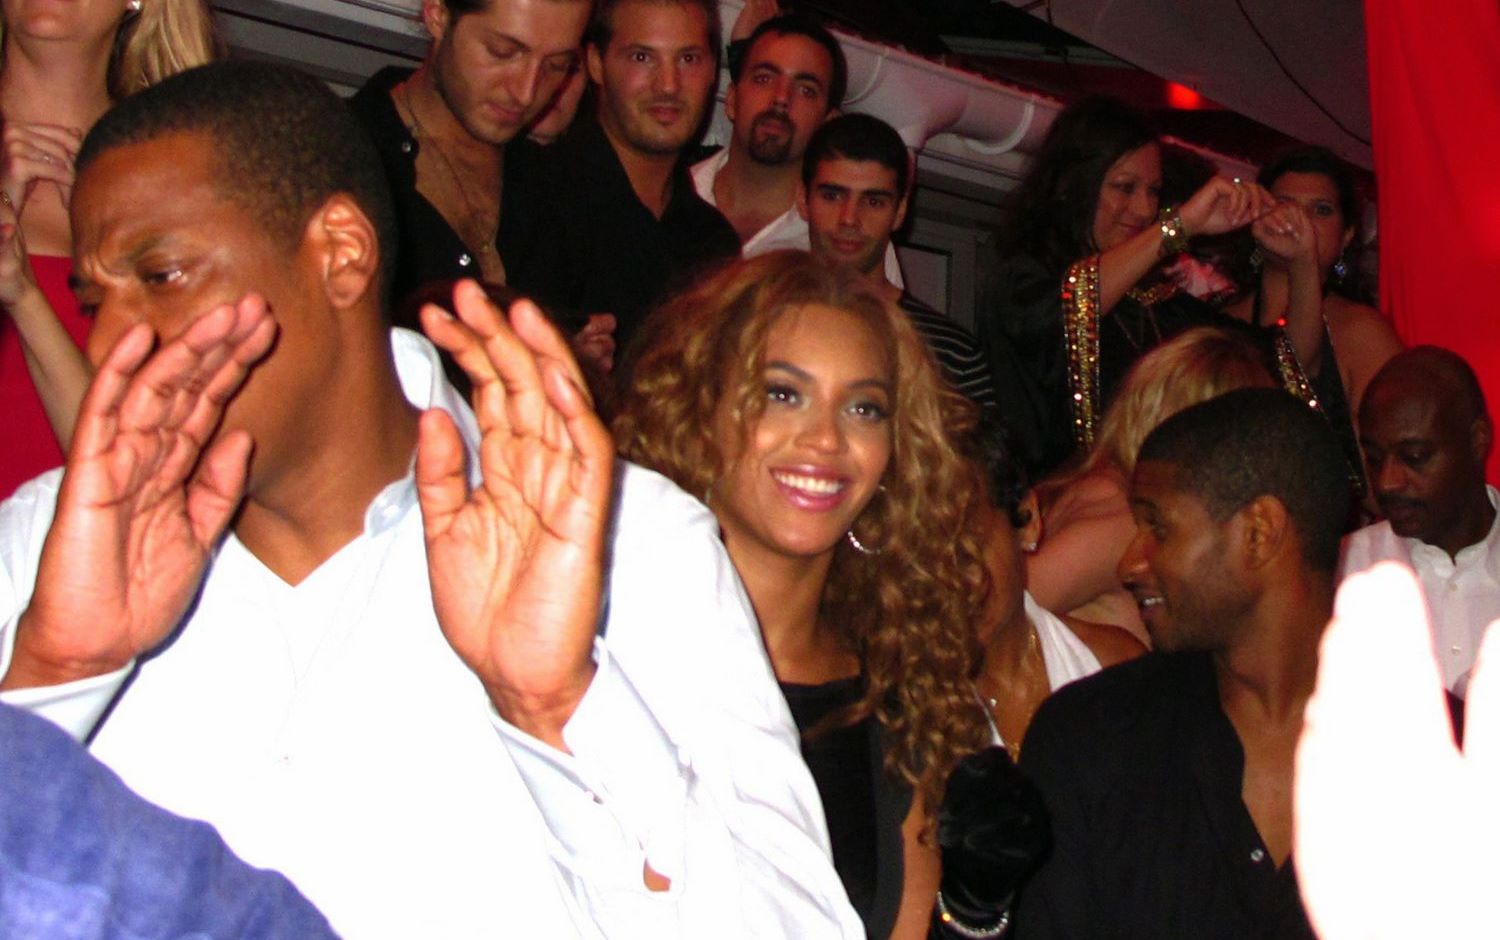 Pics: Beyonce, Jay-Z & Usher Celebrate The New Year Together | HipHop-N-More1500 x 940